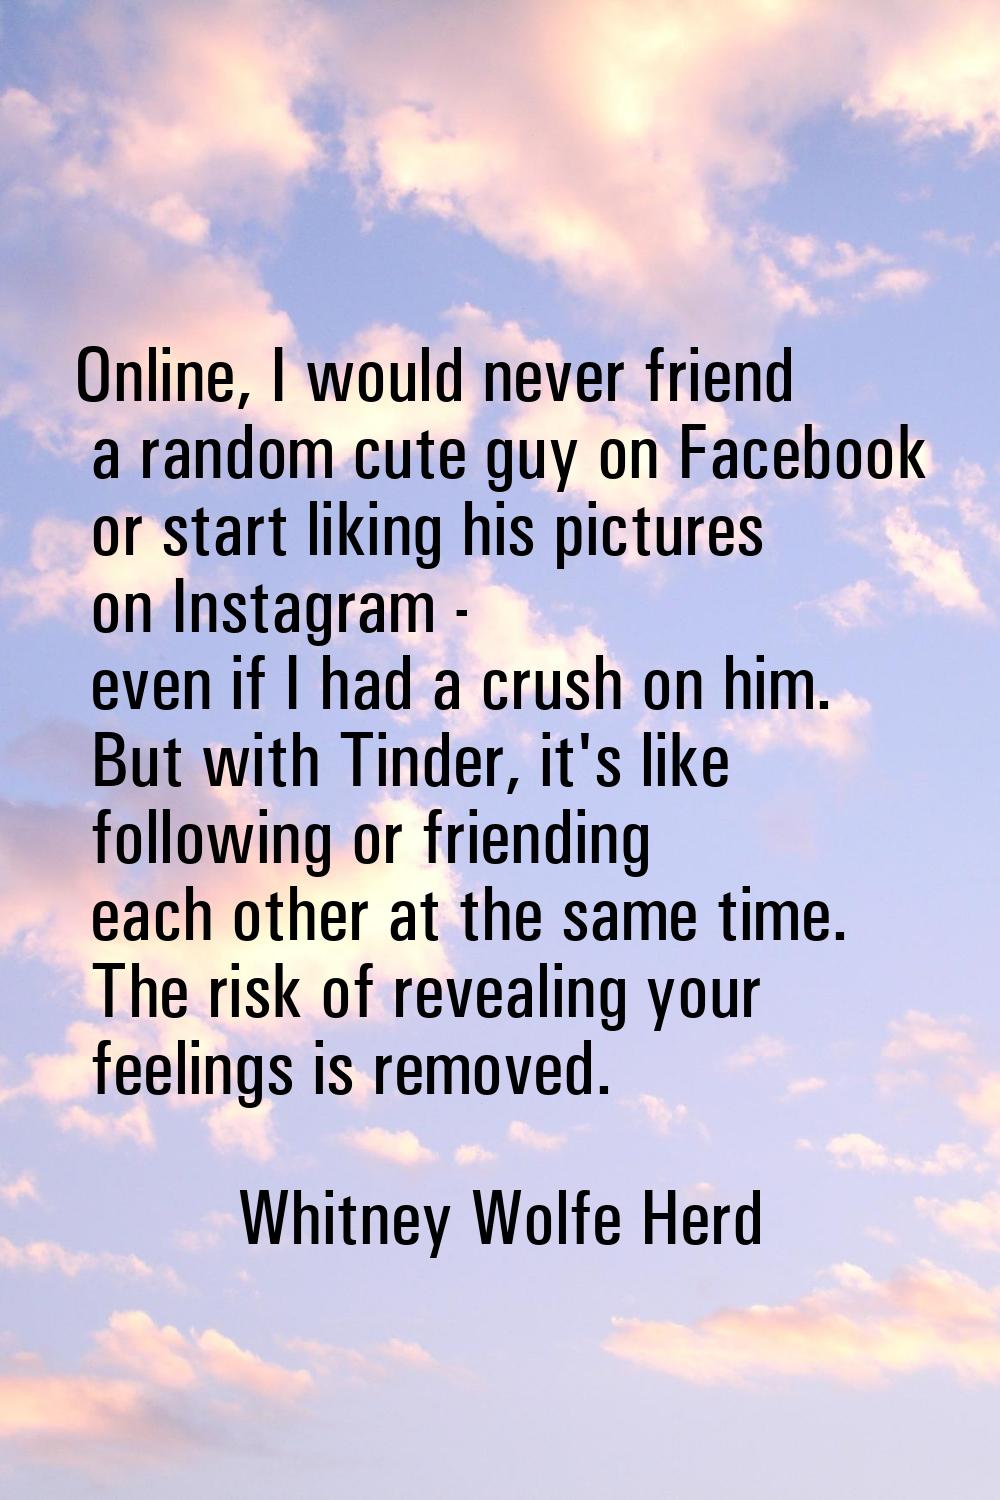 Online, I would never friend a random cute guy on Facebook or start liking his pictures on Instagra